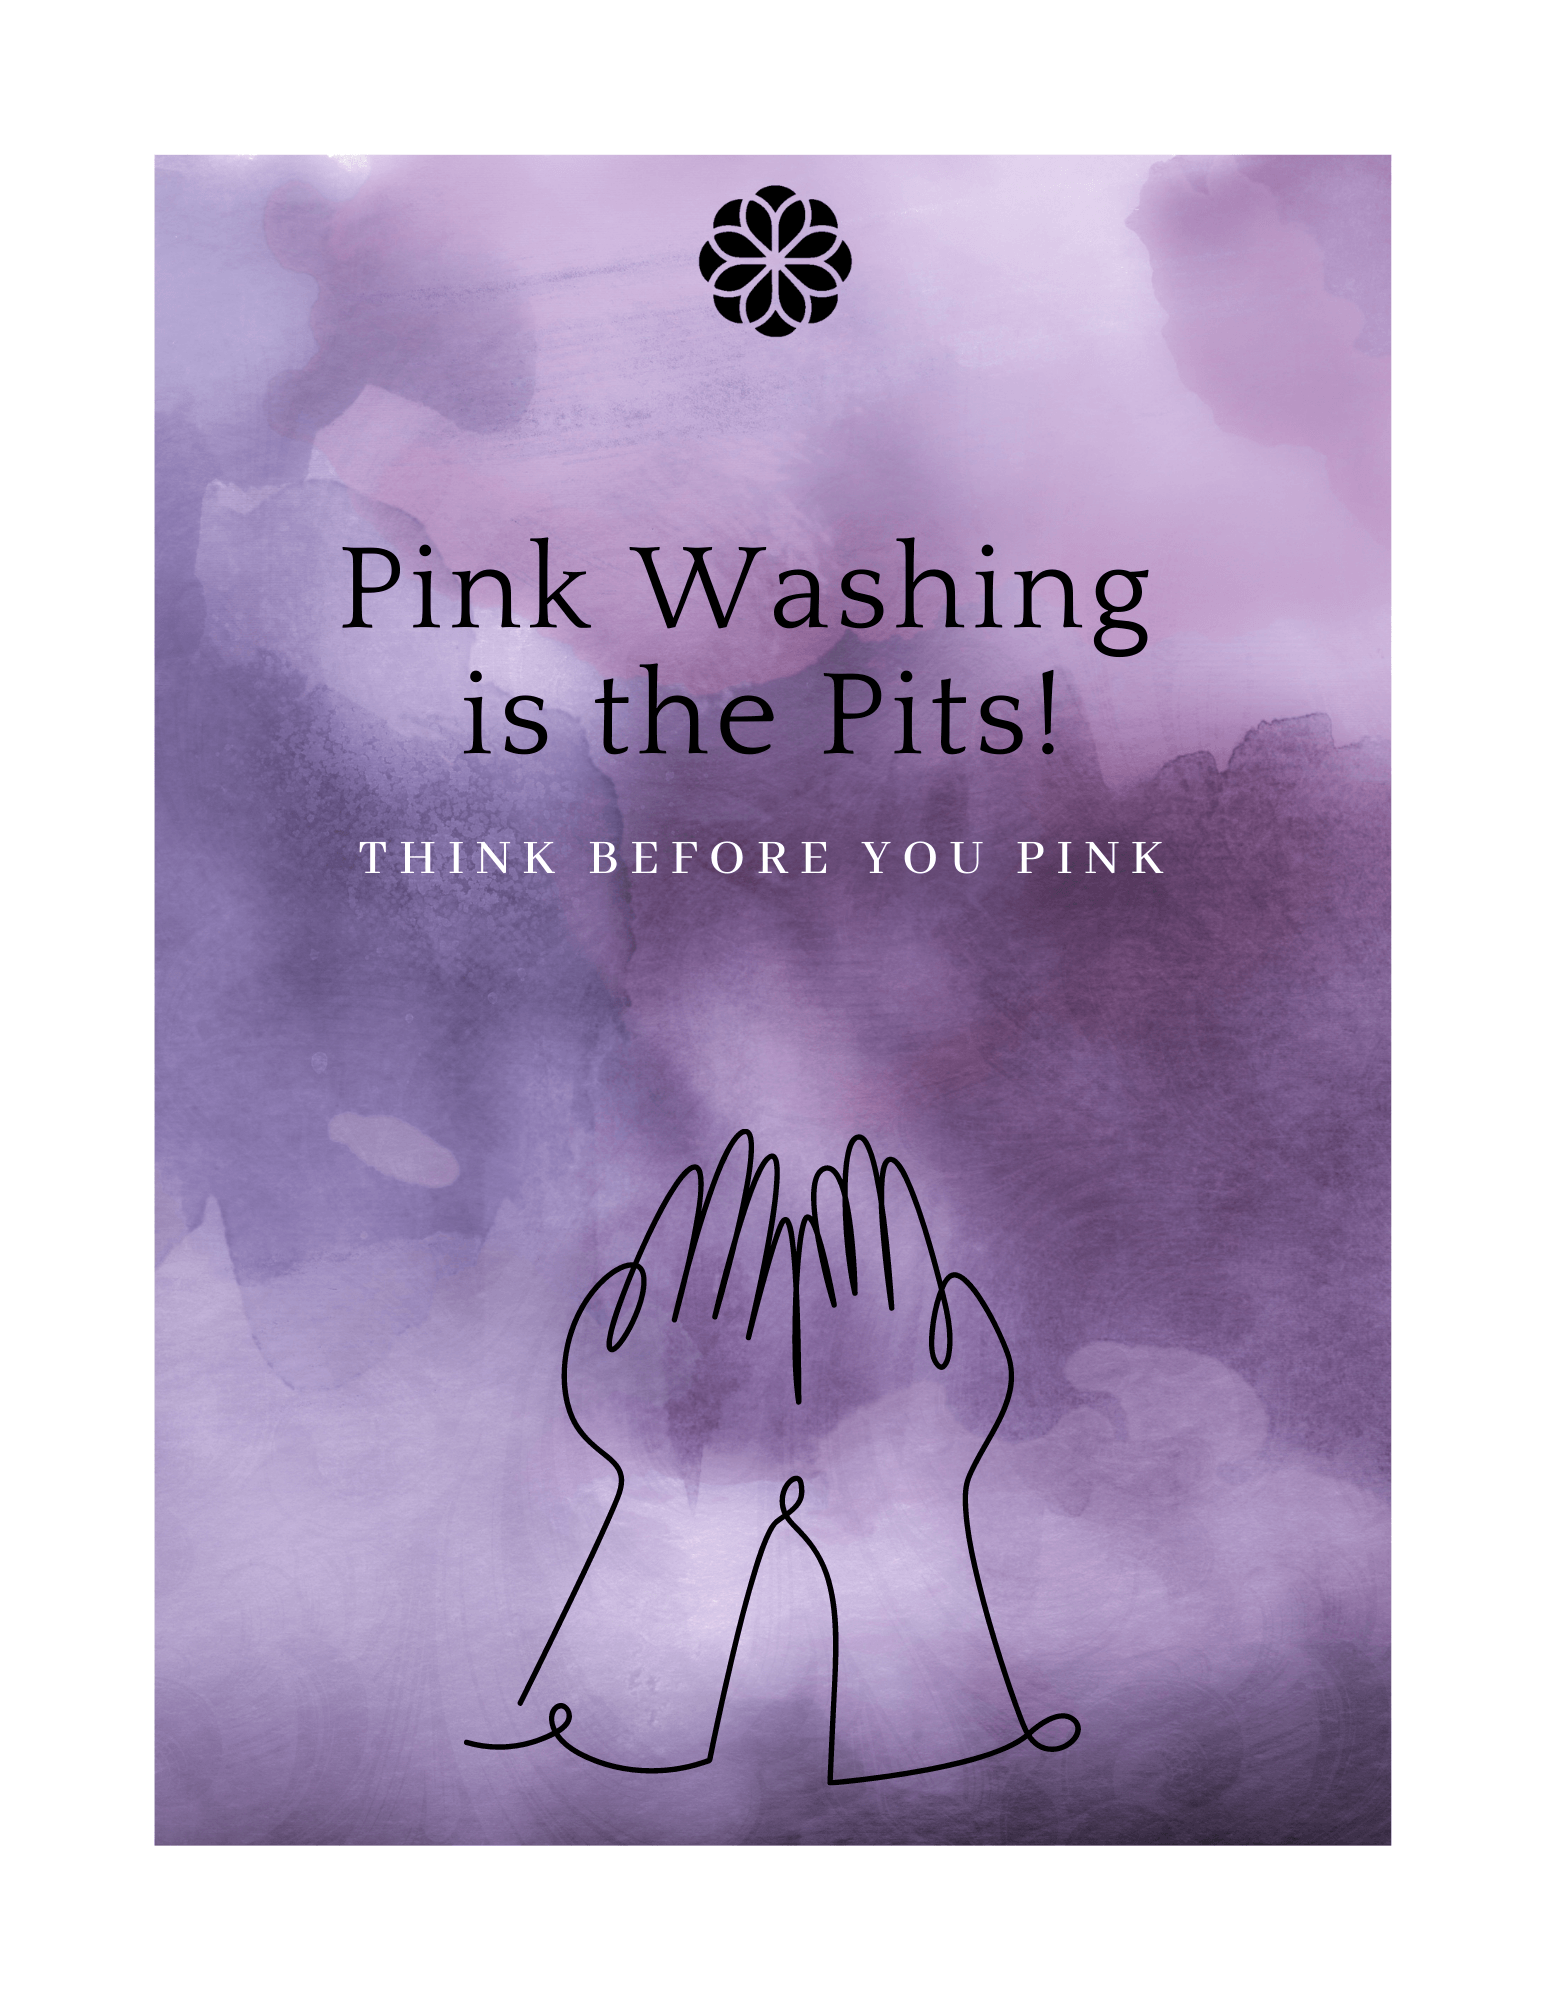 Breast Cancer Awareness Month: Pink Washing is The Pits!